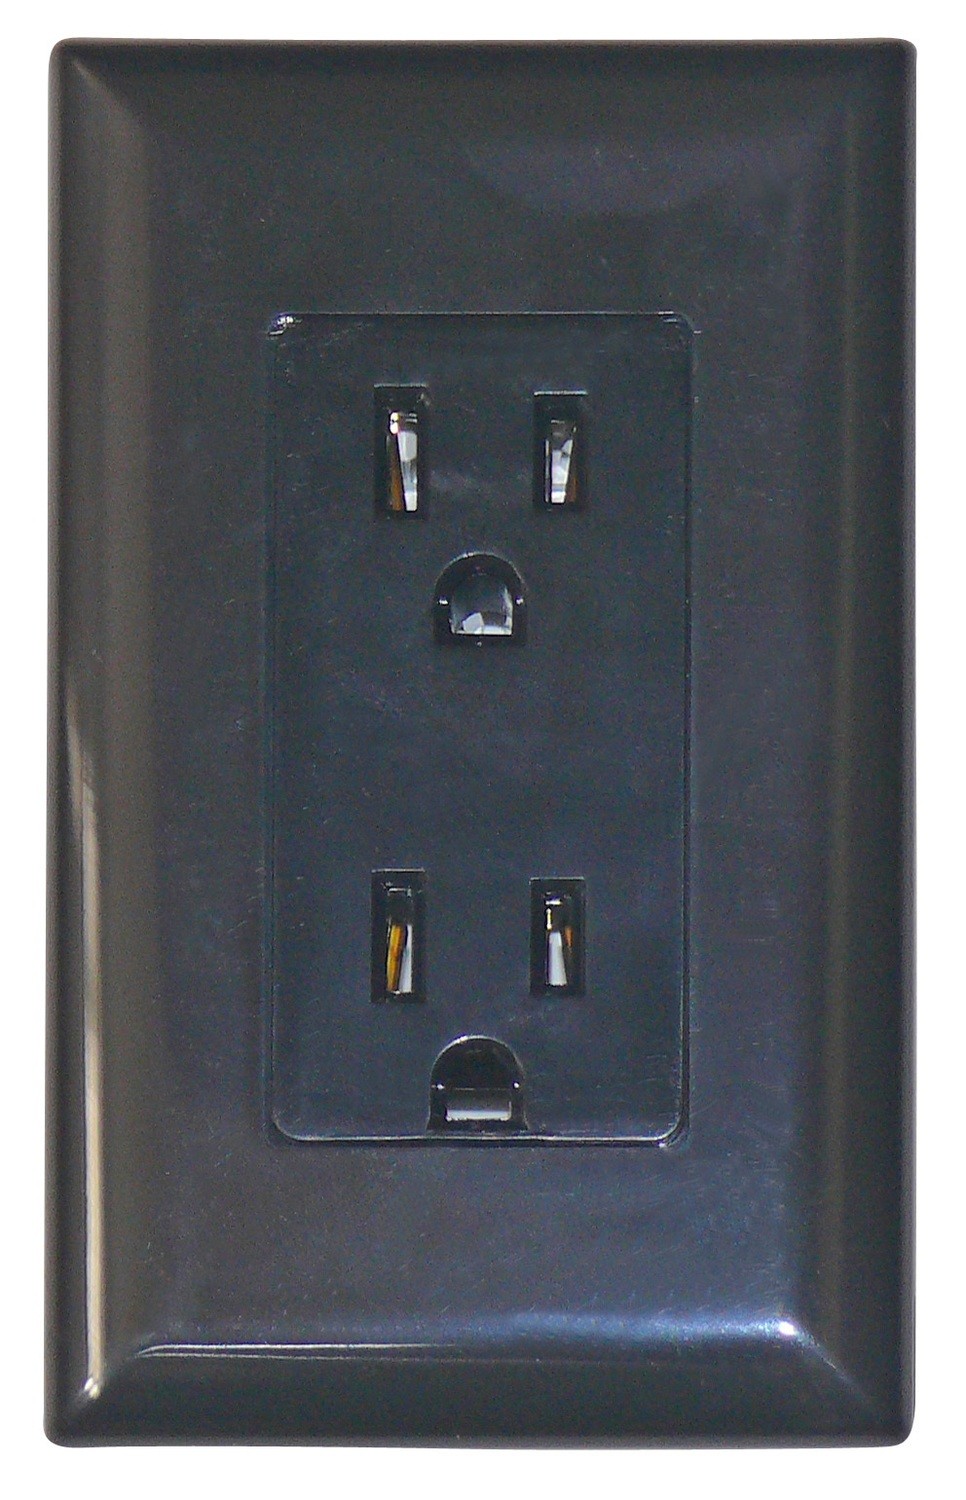 15 Amp Decor Receptacle with Cover - Black